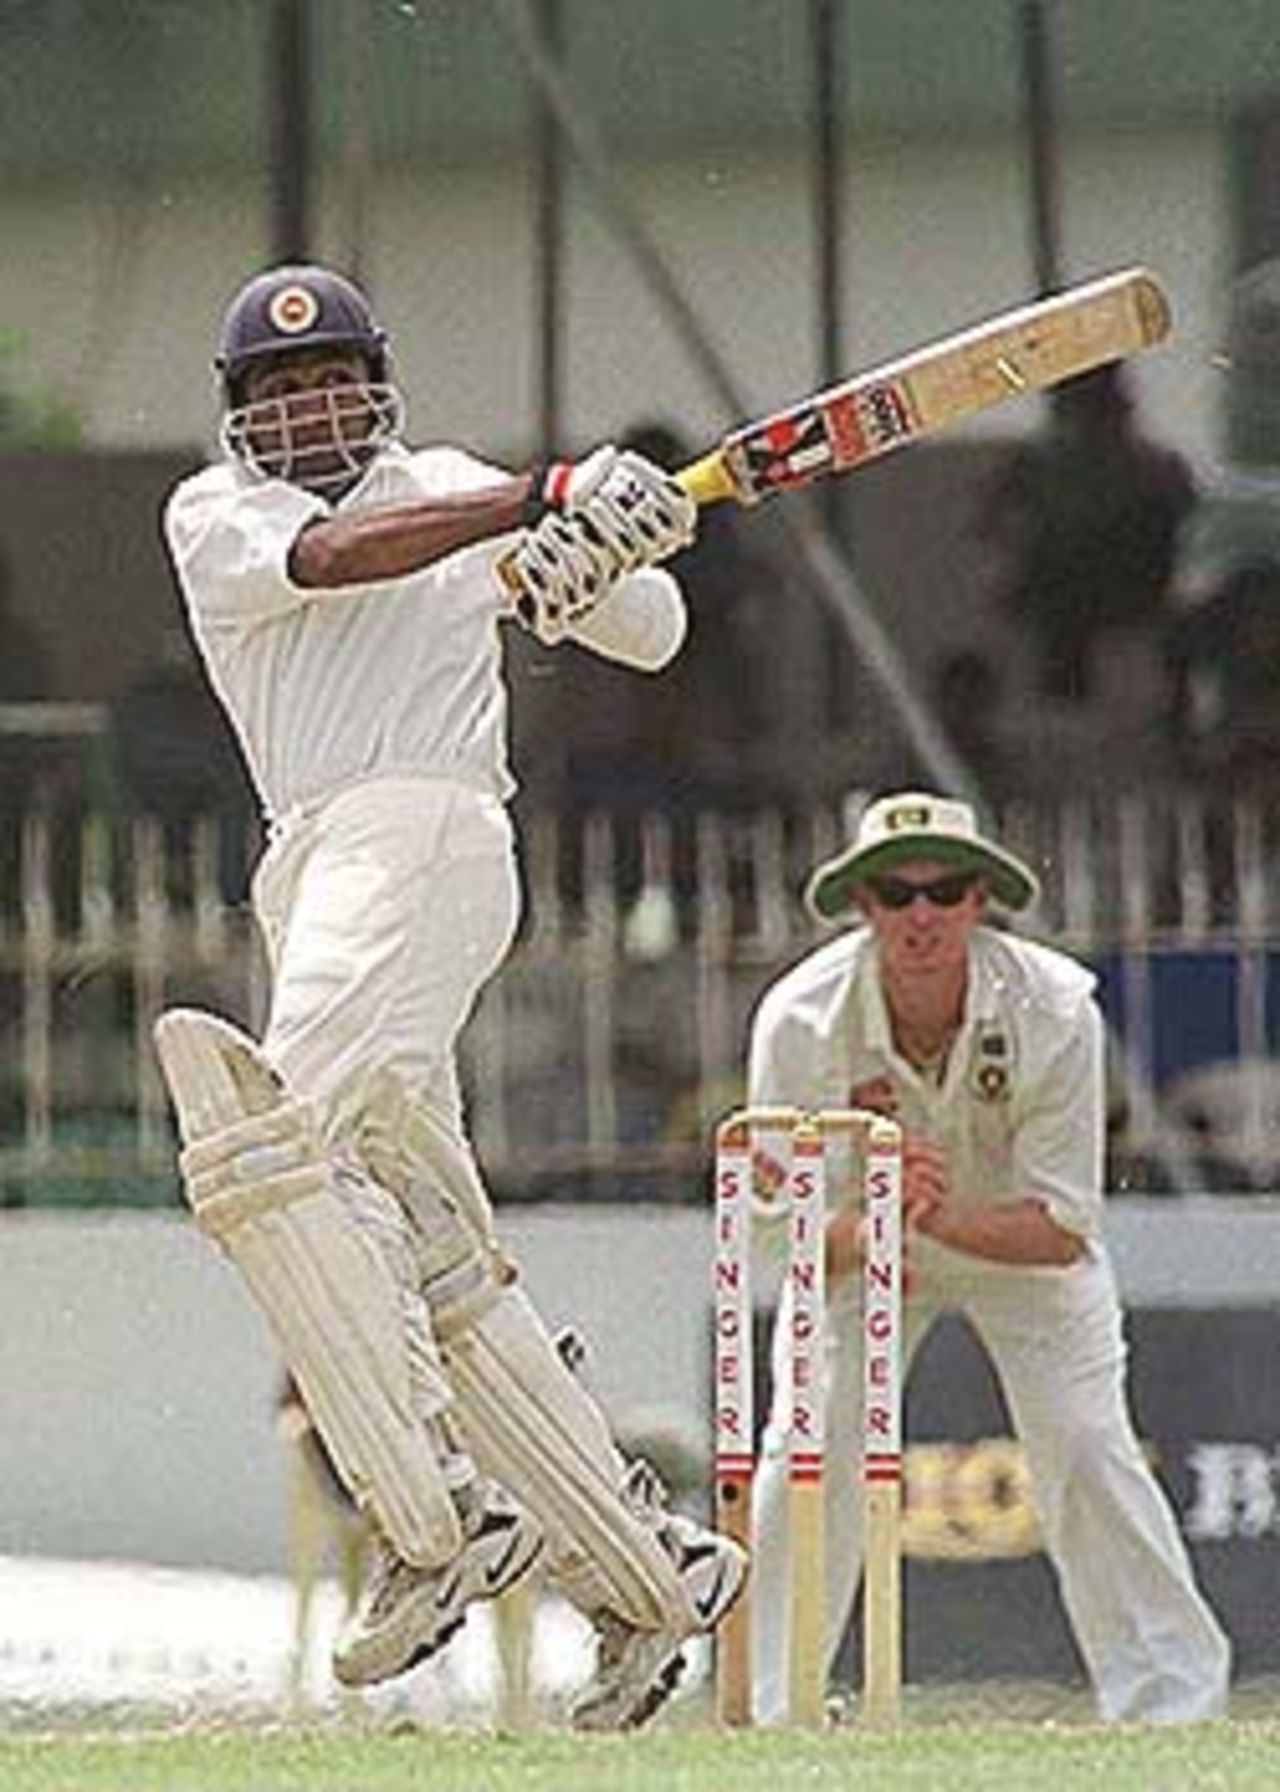 Jayawardene pulls the ball over mid-wicket to collect yet another boundary, South Africa in Sri Lanka, 2000/01, 3rd Test, Sri Lanka v South Africa, Sinhalese Sports Club Ground, Colombo, 06-10 August 2000 (Day 5).